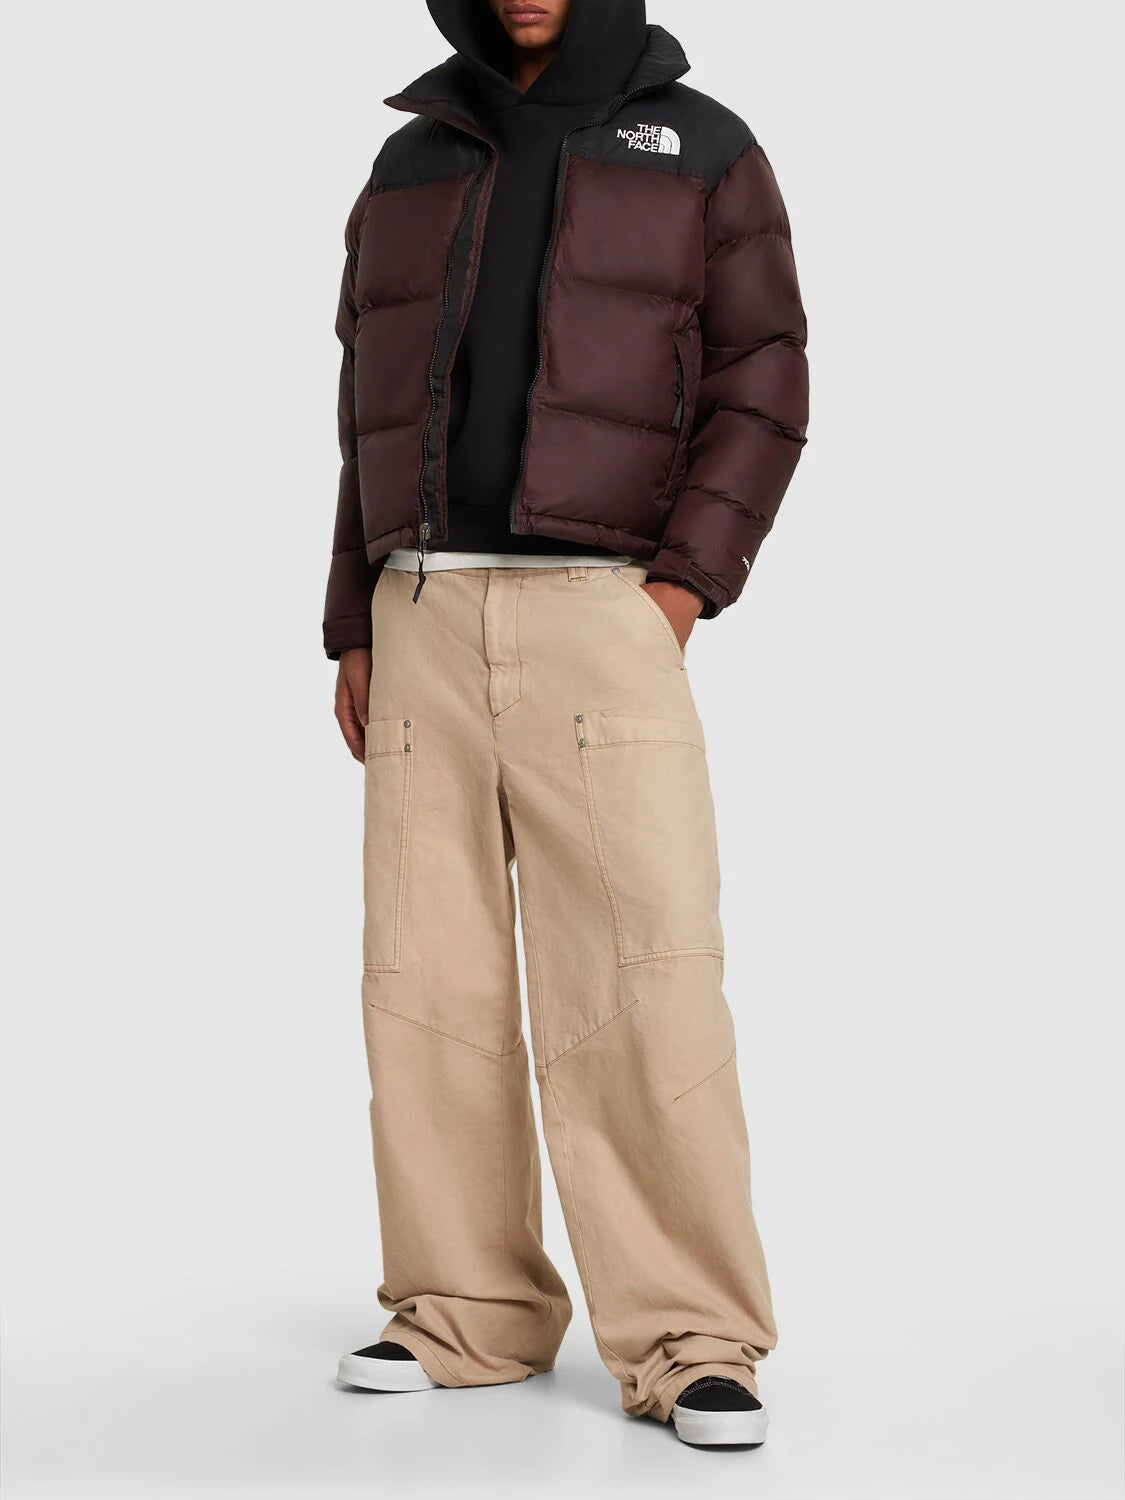 The North Face 1996 Retro Nuptse down puffer jacket in brown and black